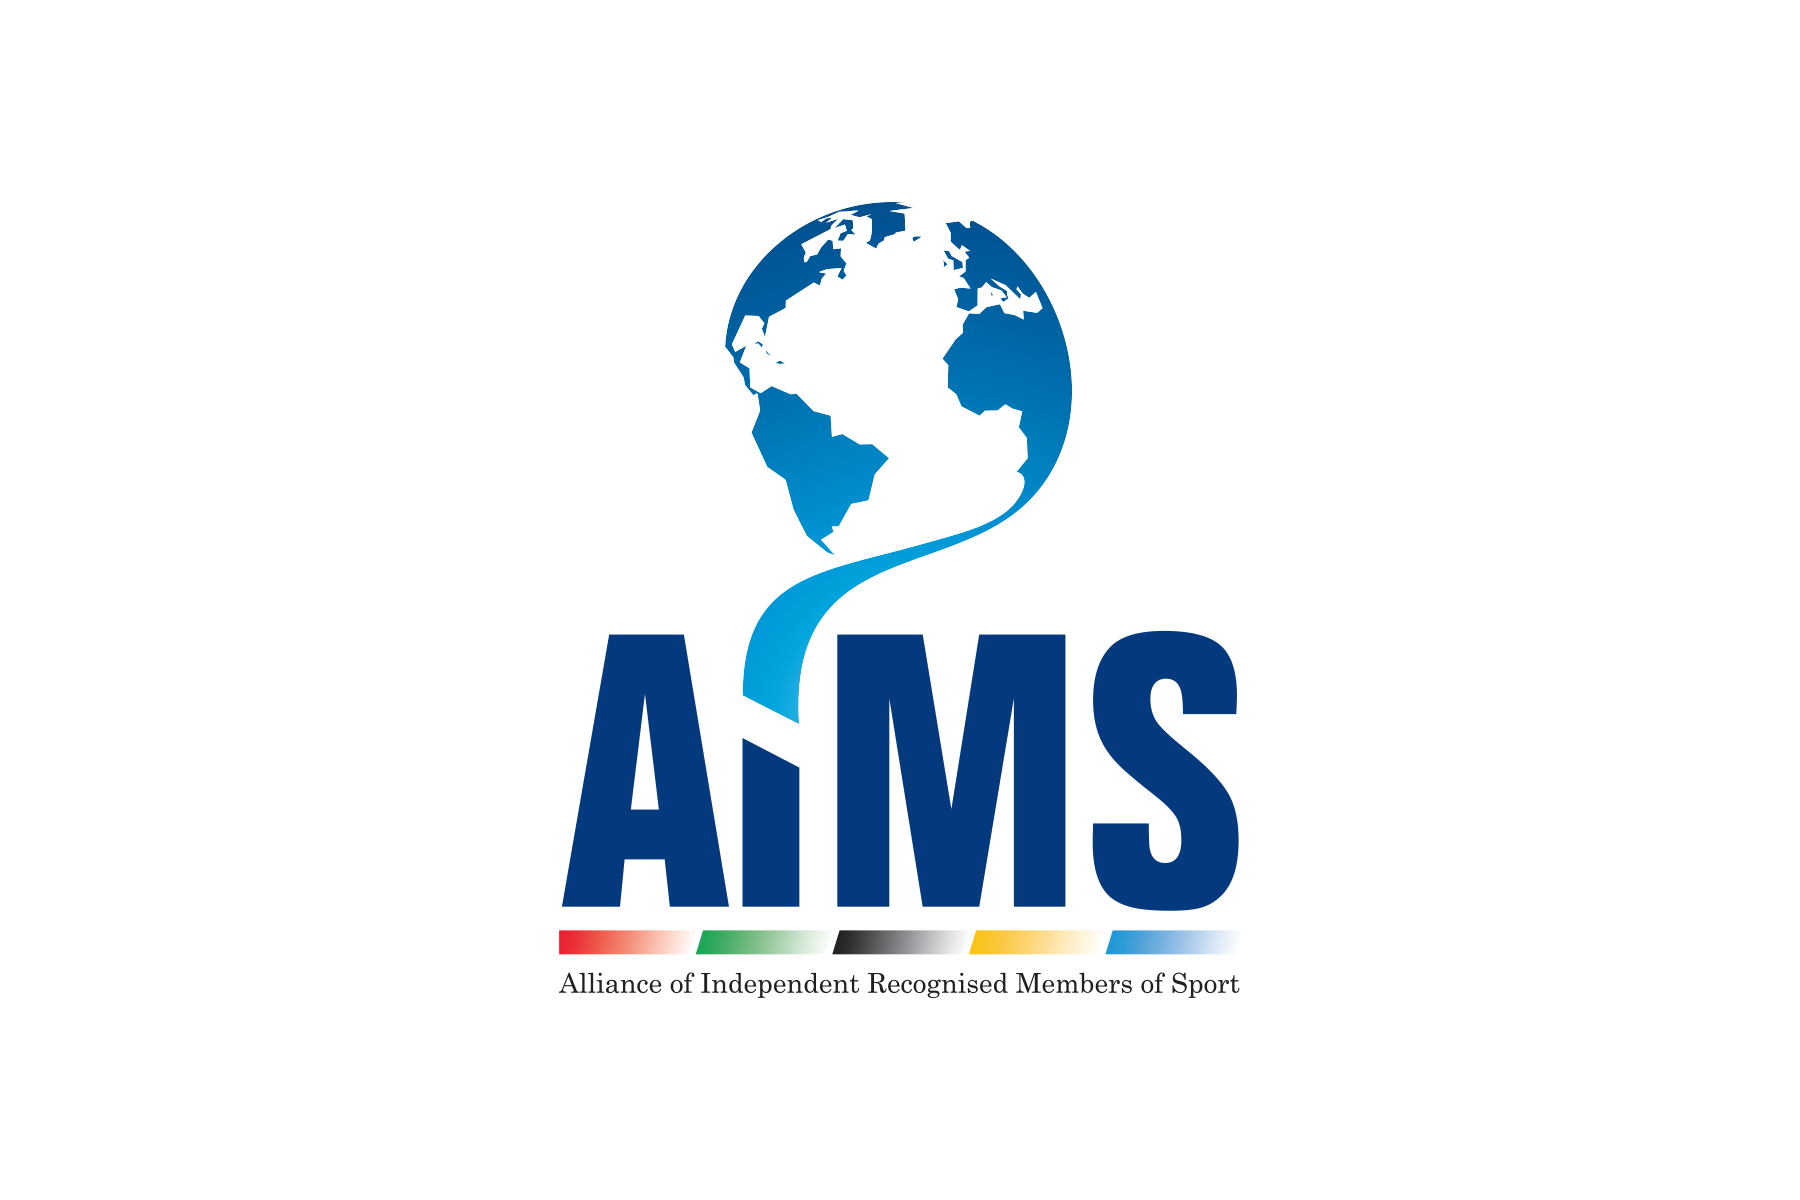 AIMS General Assembly